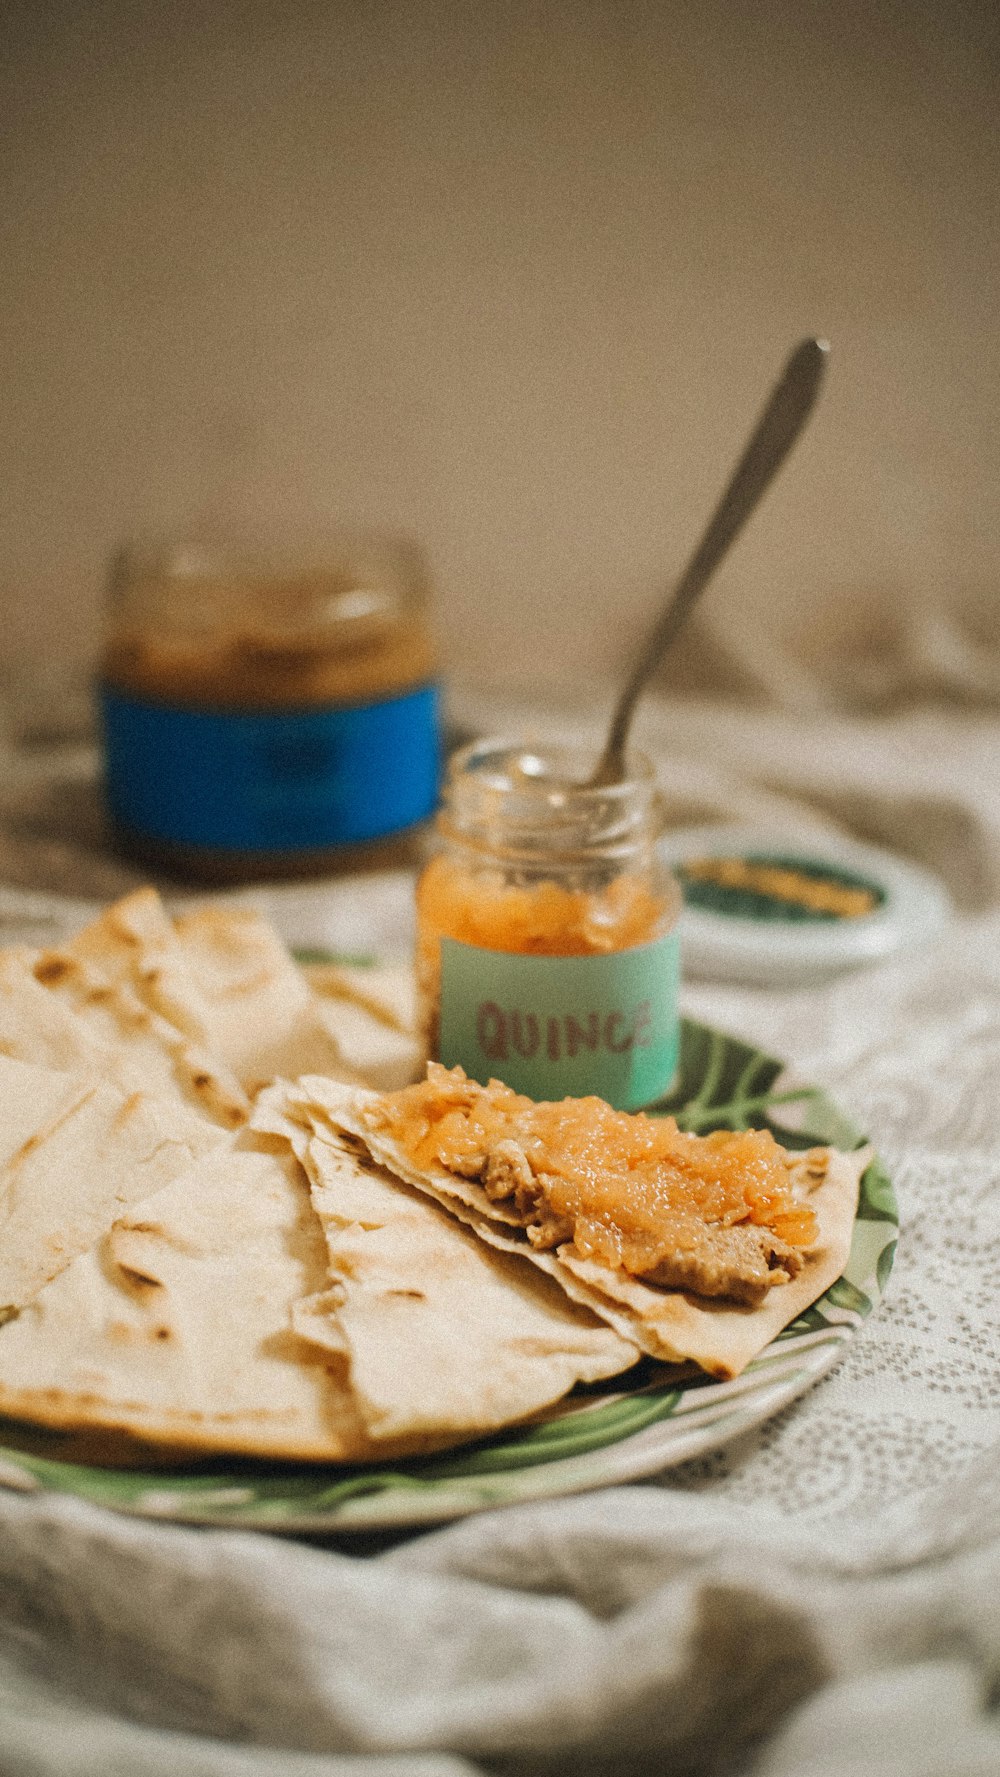 a plate topped with tortillas next to a jar of peanut butter